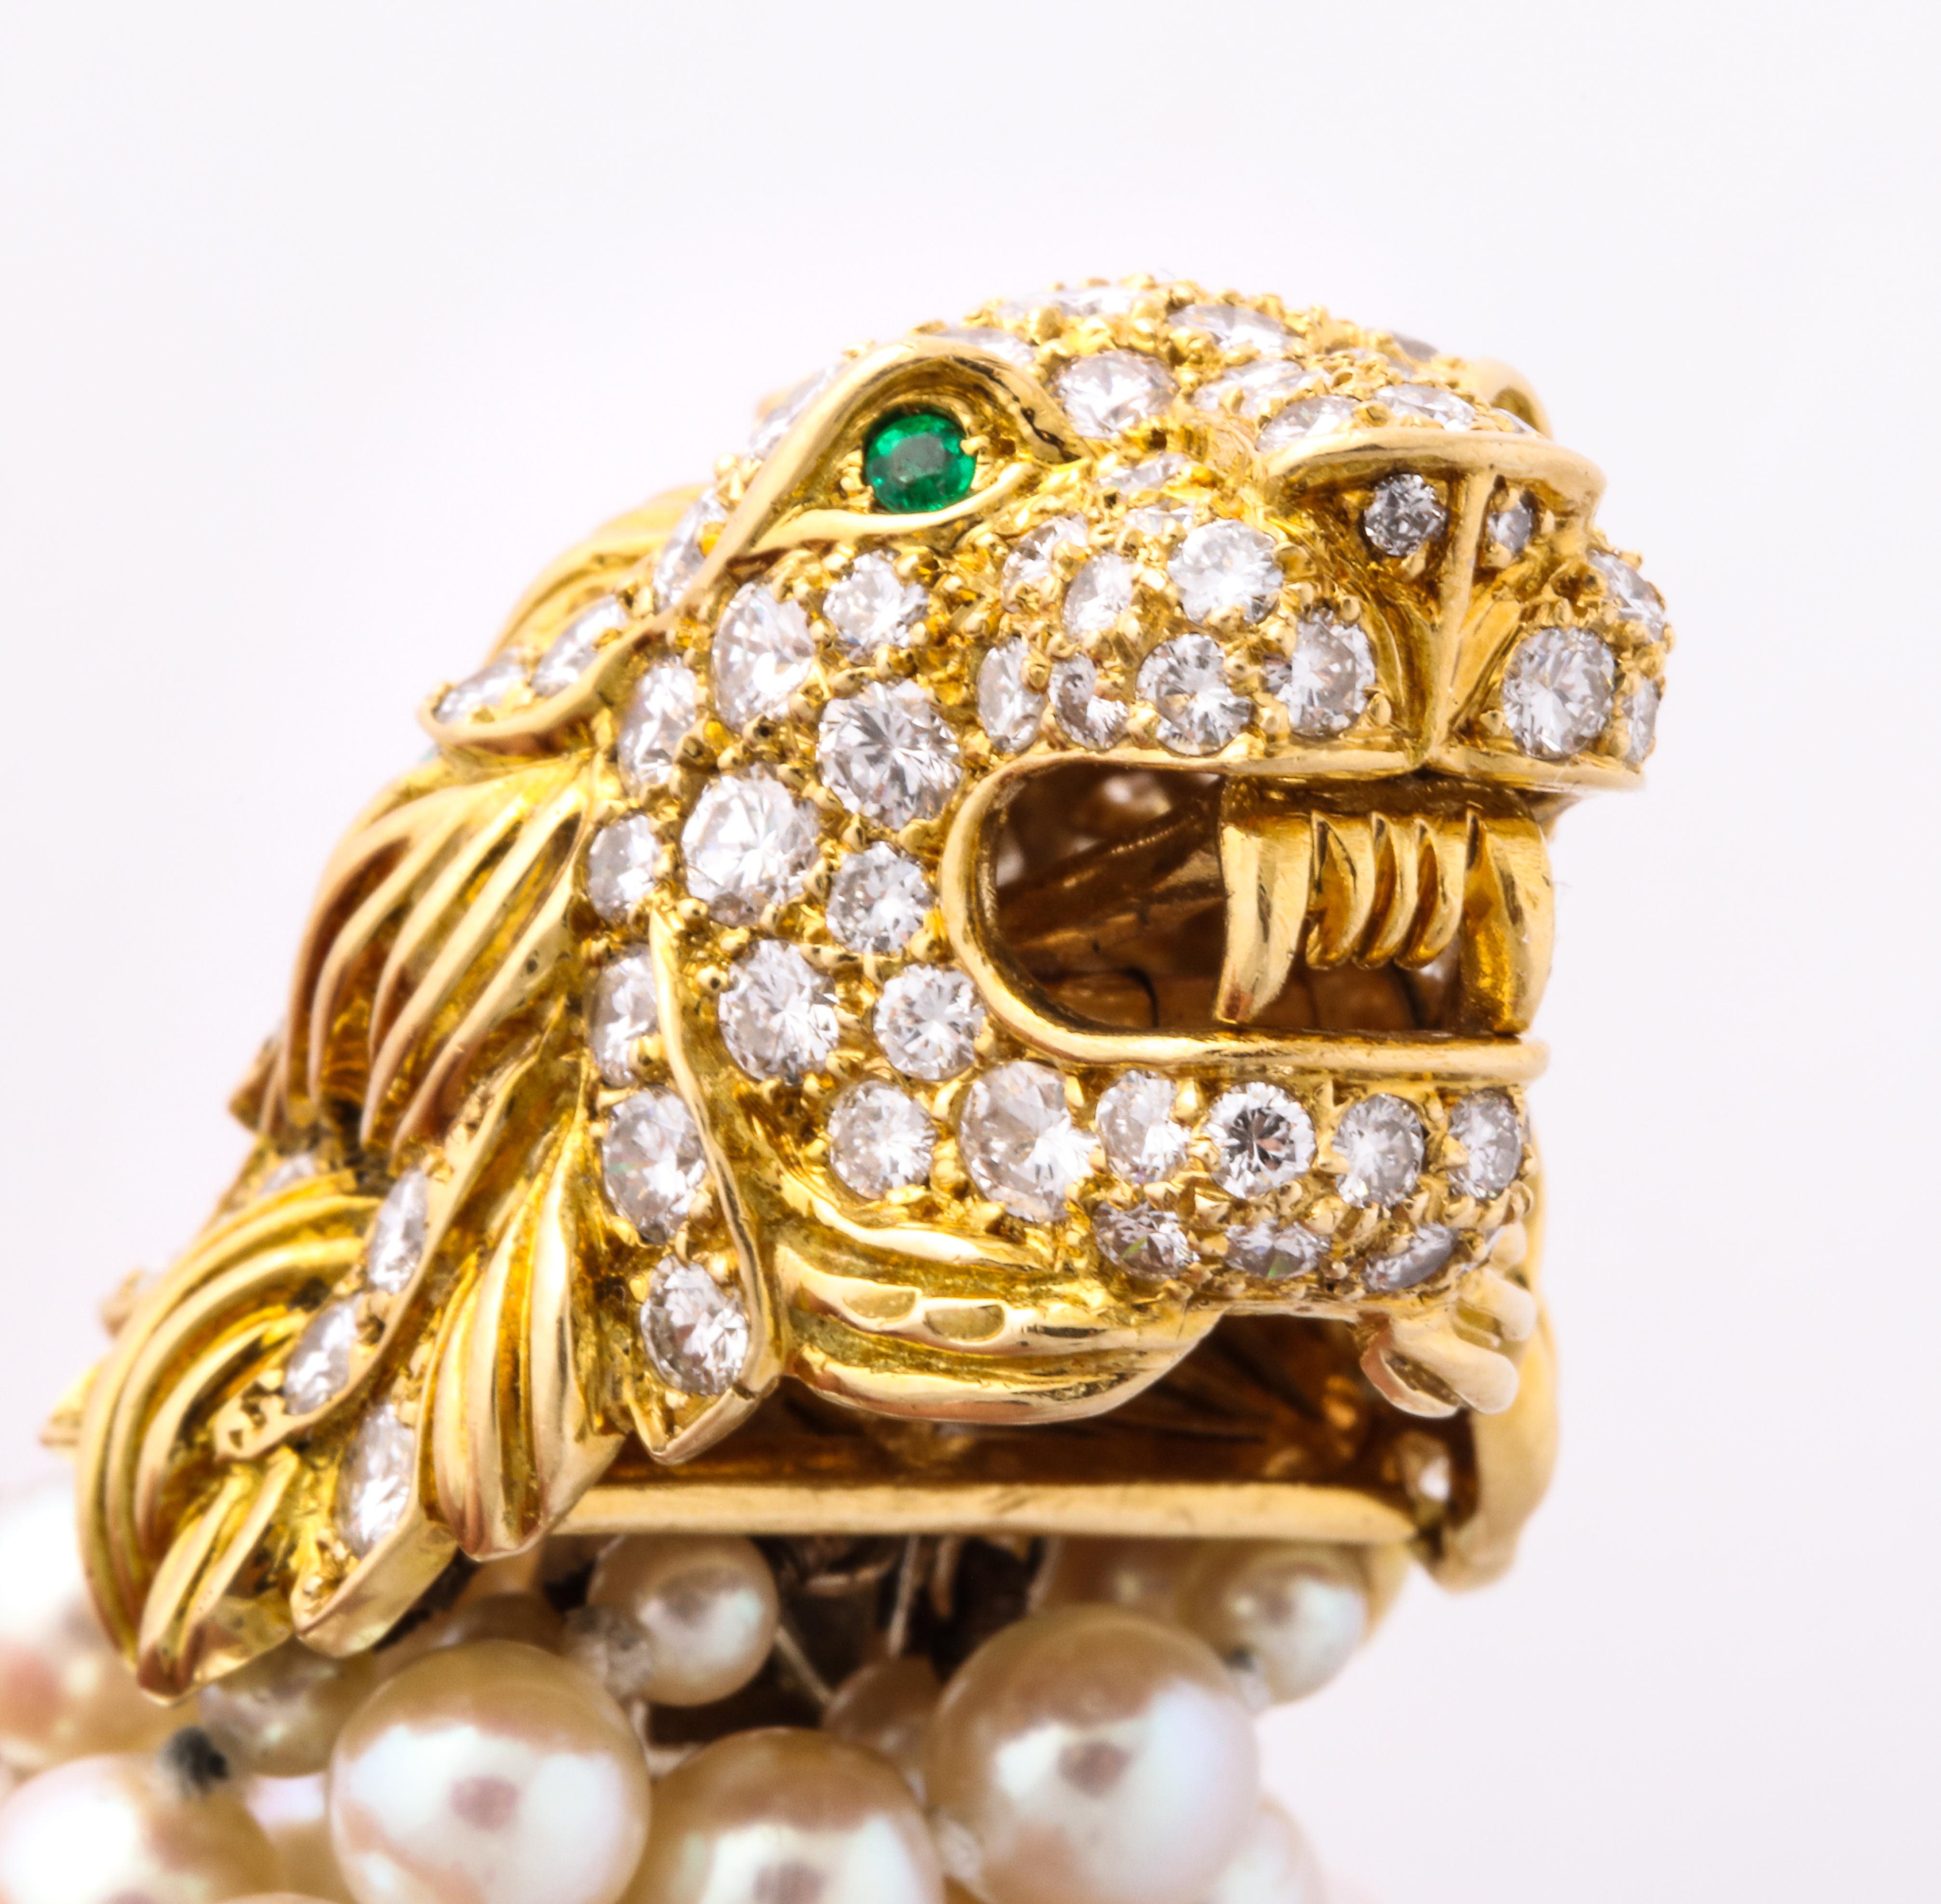 Made by Van Cleef and Arpels 1969, this eye catching pearl bracelet has a stunning lion's head for the clasp with emerald eyes and beautiful diamond work.

Signed Van Cleef and Arpels, serial numbered, and dated.

From Catherine Cariou: 